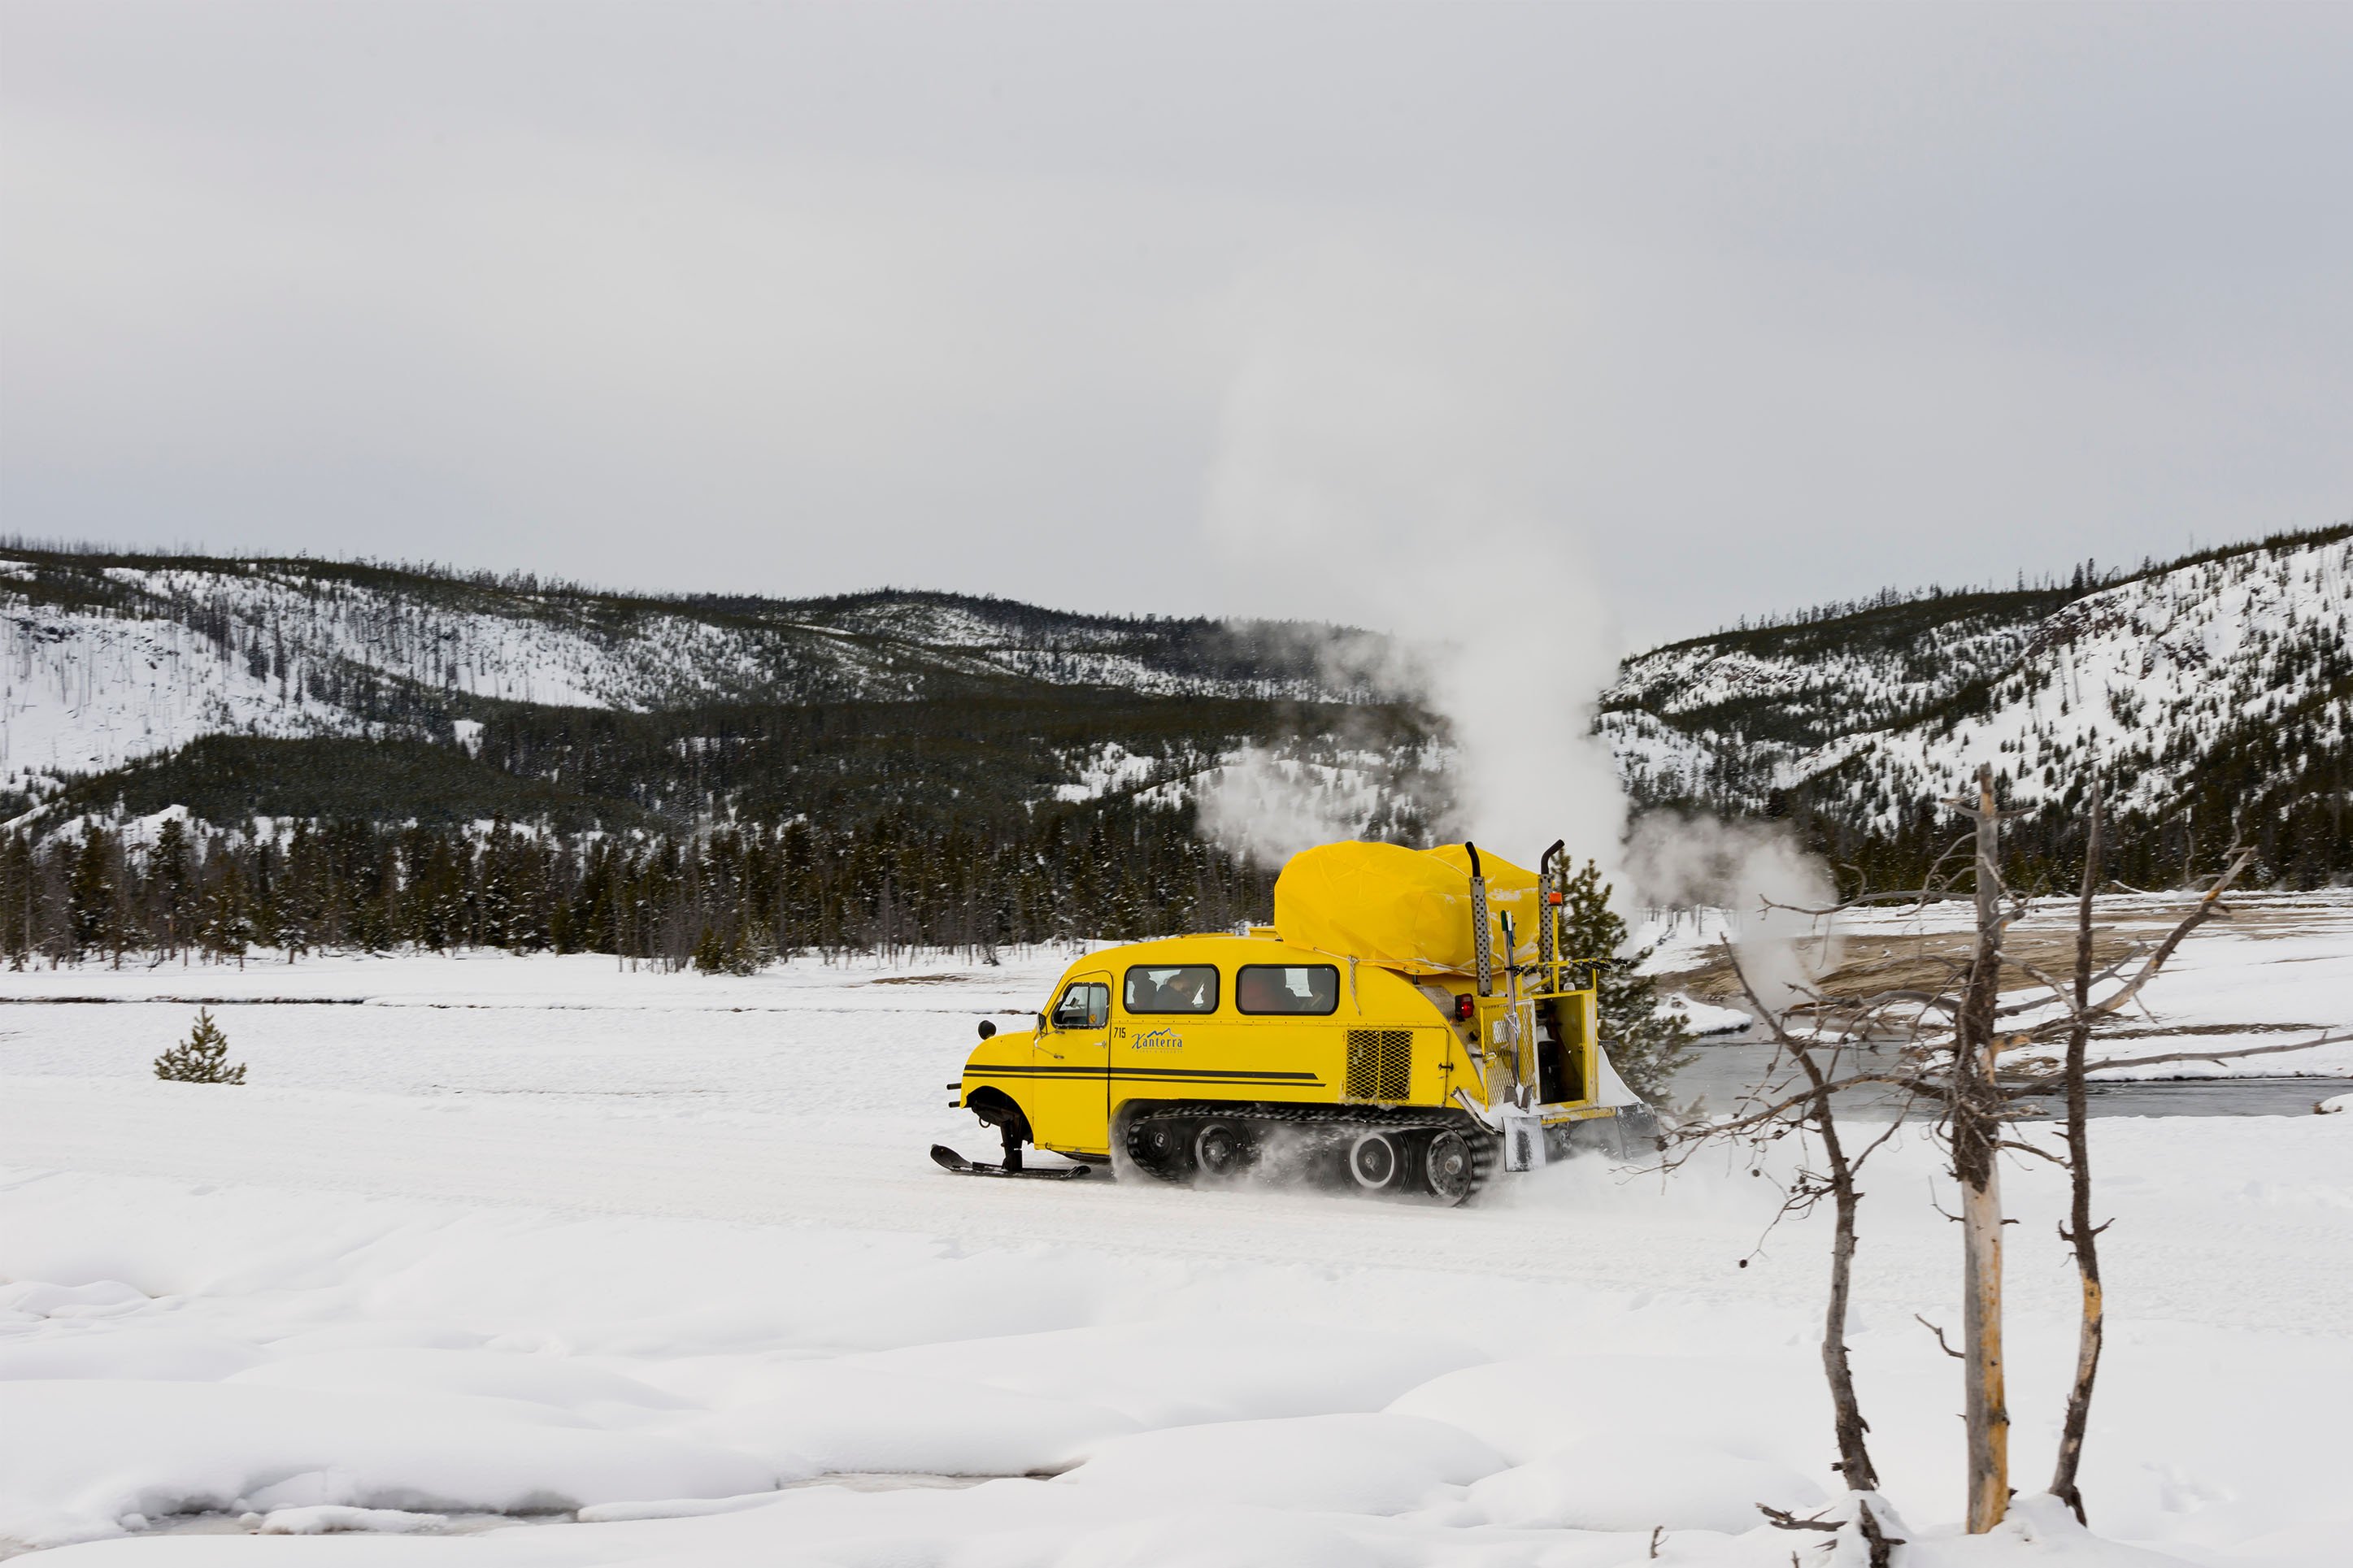 Snowcoach in Yellowstone National Park